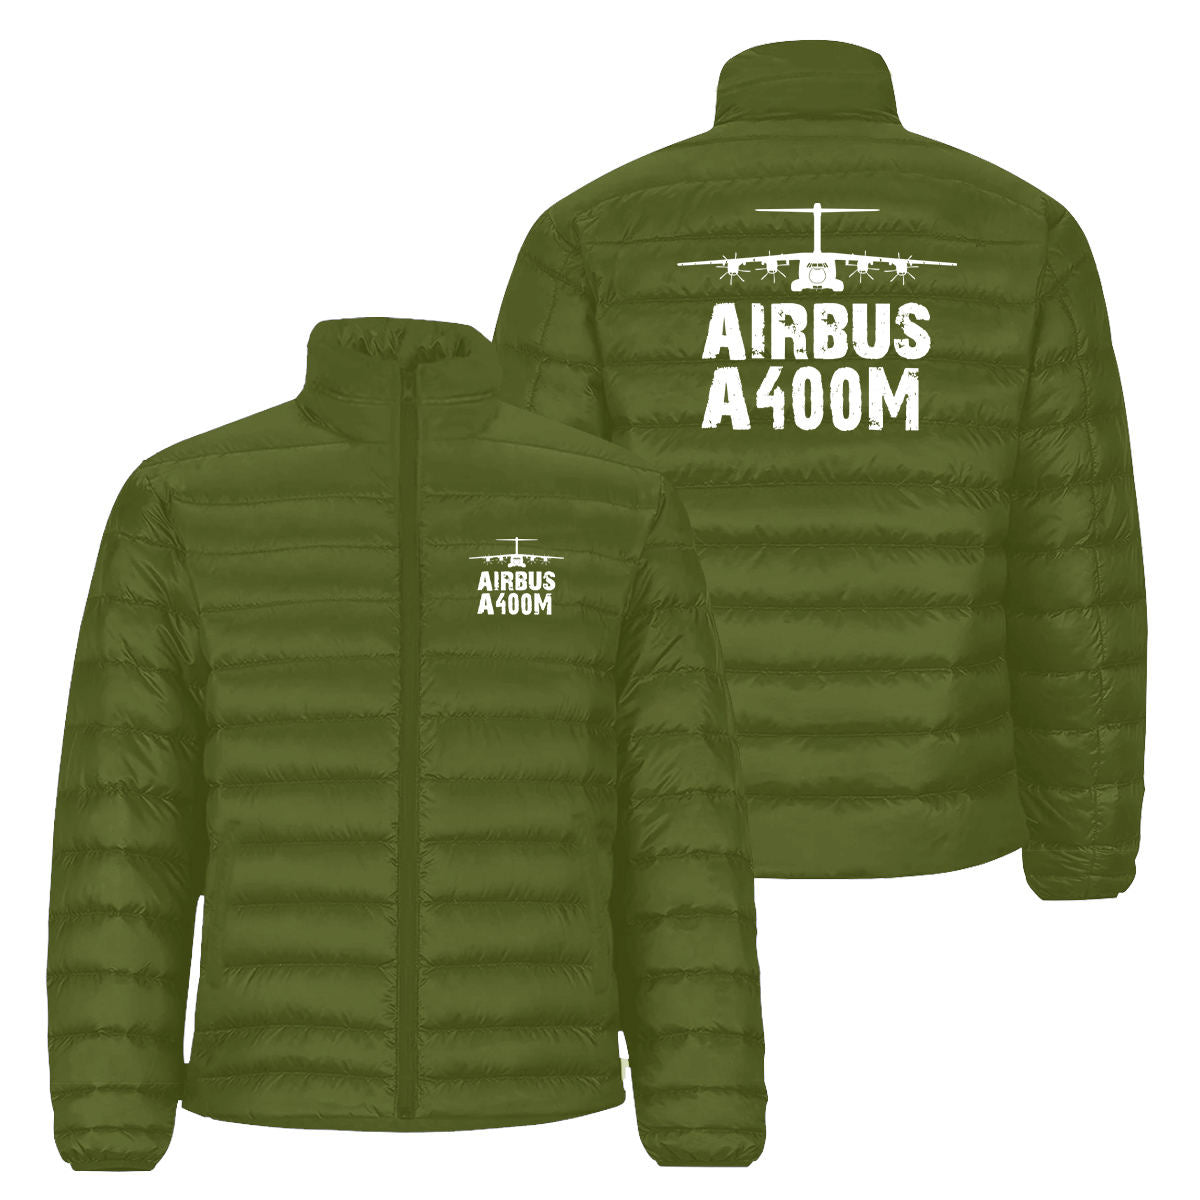 Airbus A400M & Plane Designed Padded Jackets